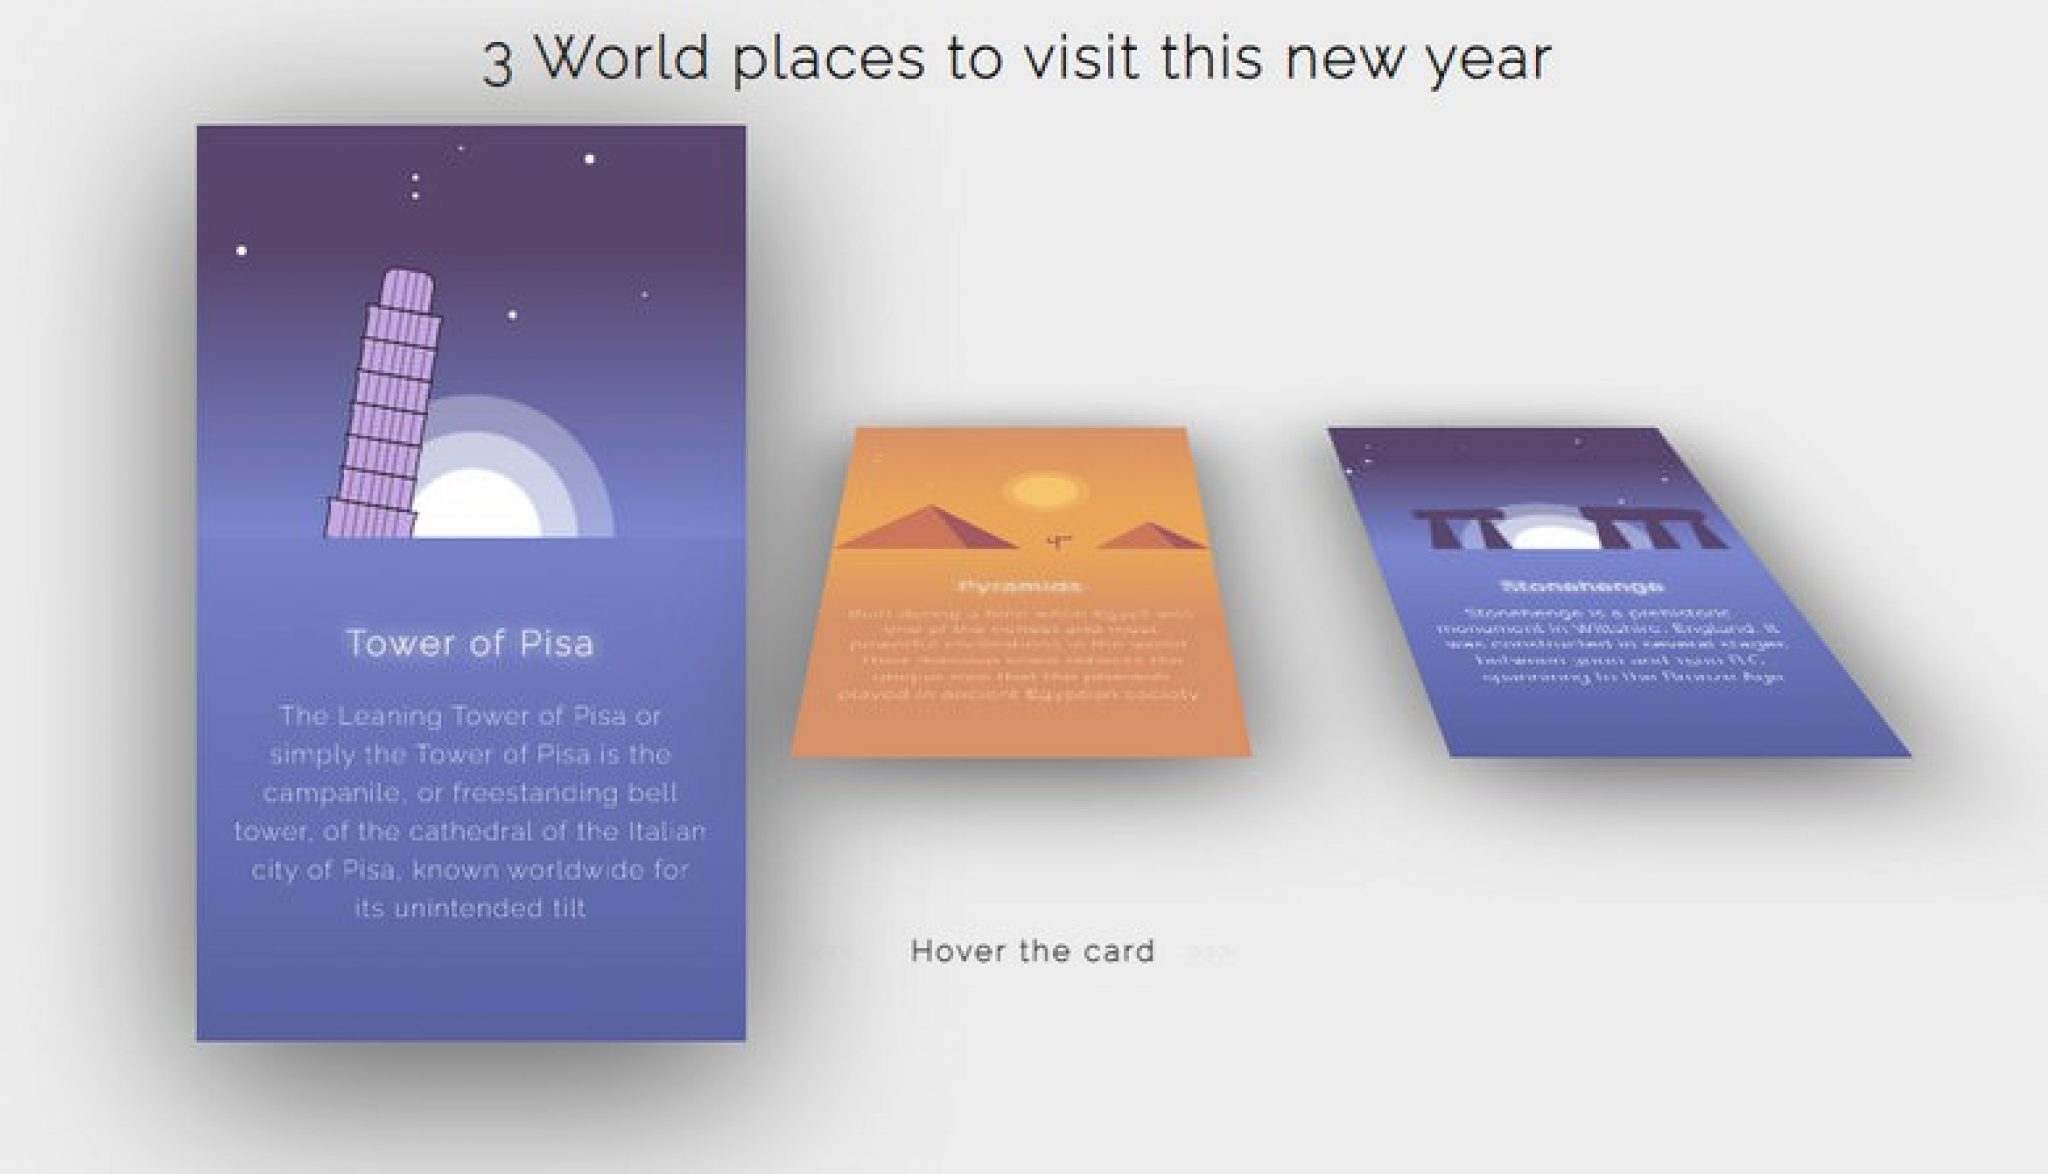 Card Hover examples